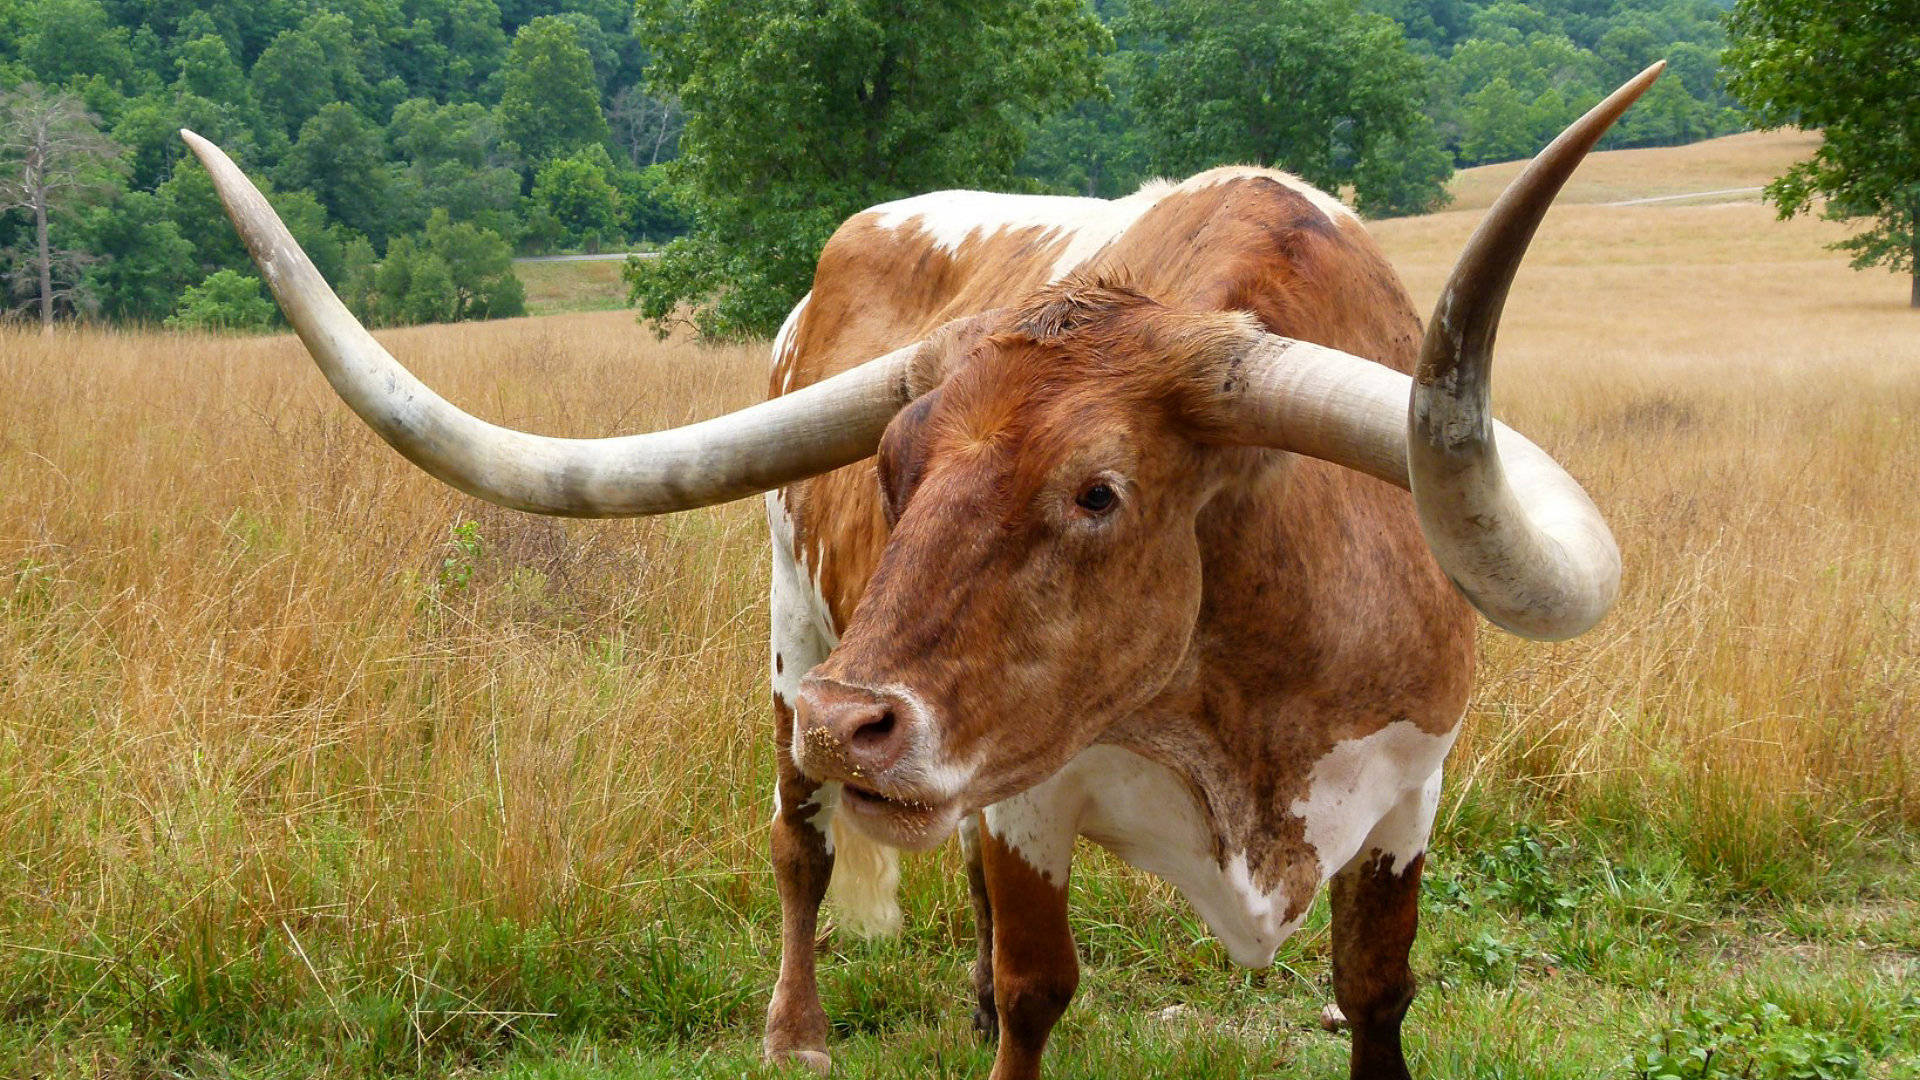 Cute Brown Cow With Curved Horns On Grass